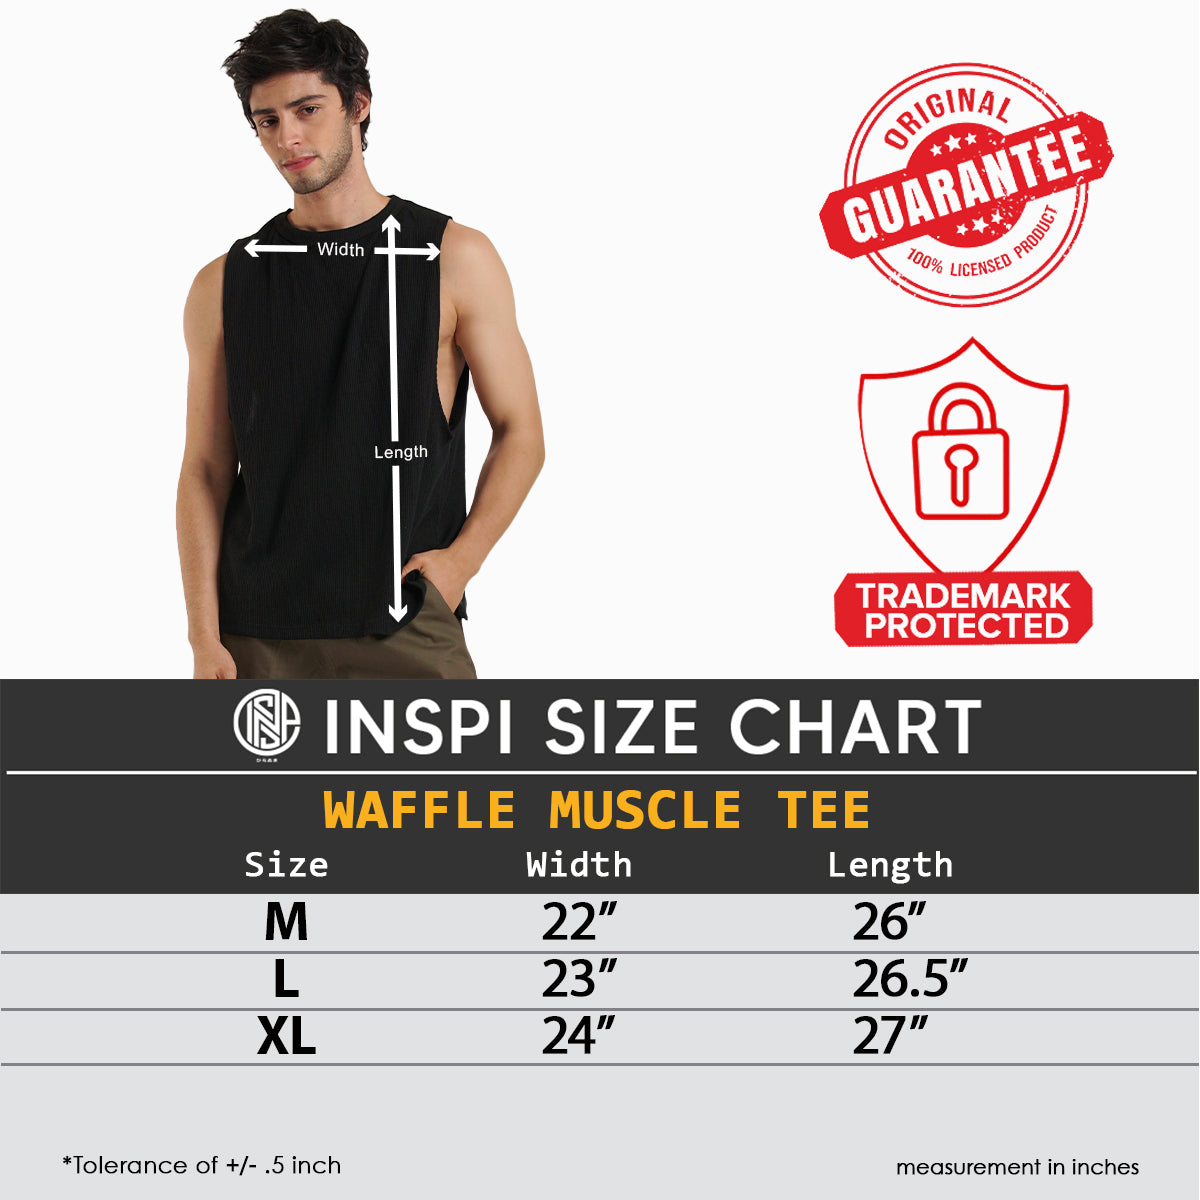 INSPI Waffle Muscle Tee Light Gray Sando for Men Plain Sleeveless Tank Top Gym Workout Exercise Beach Outfit